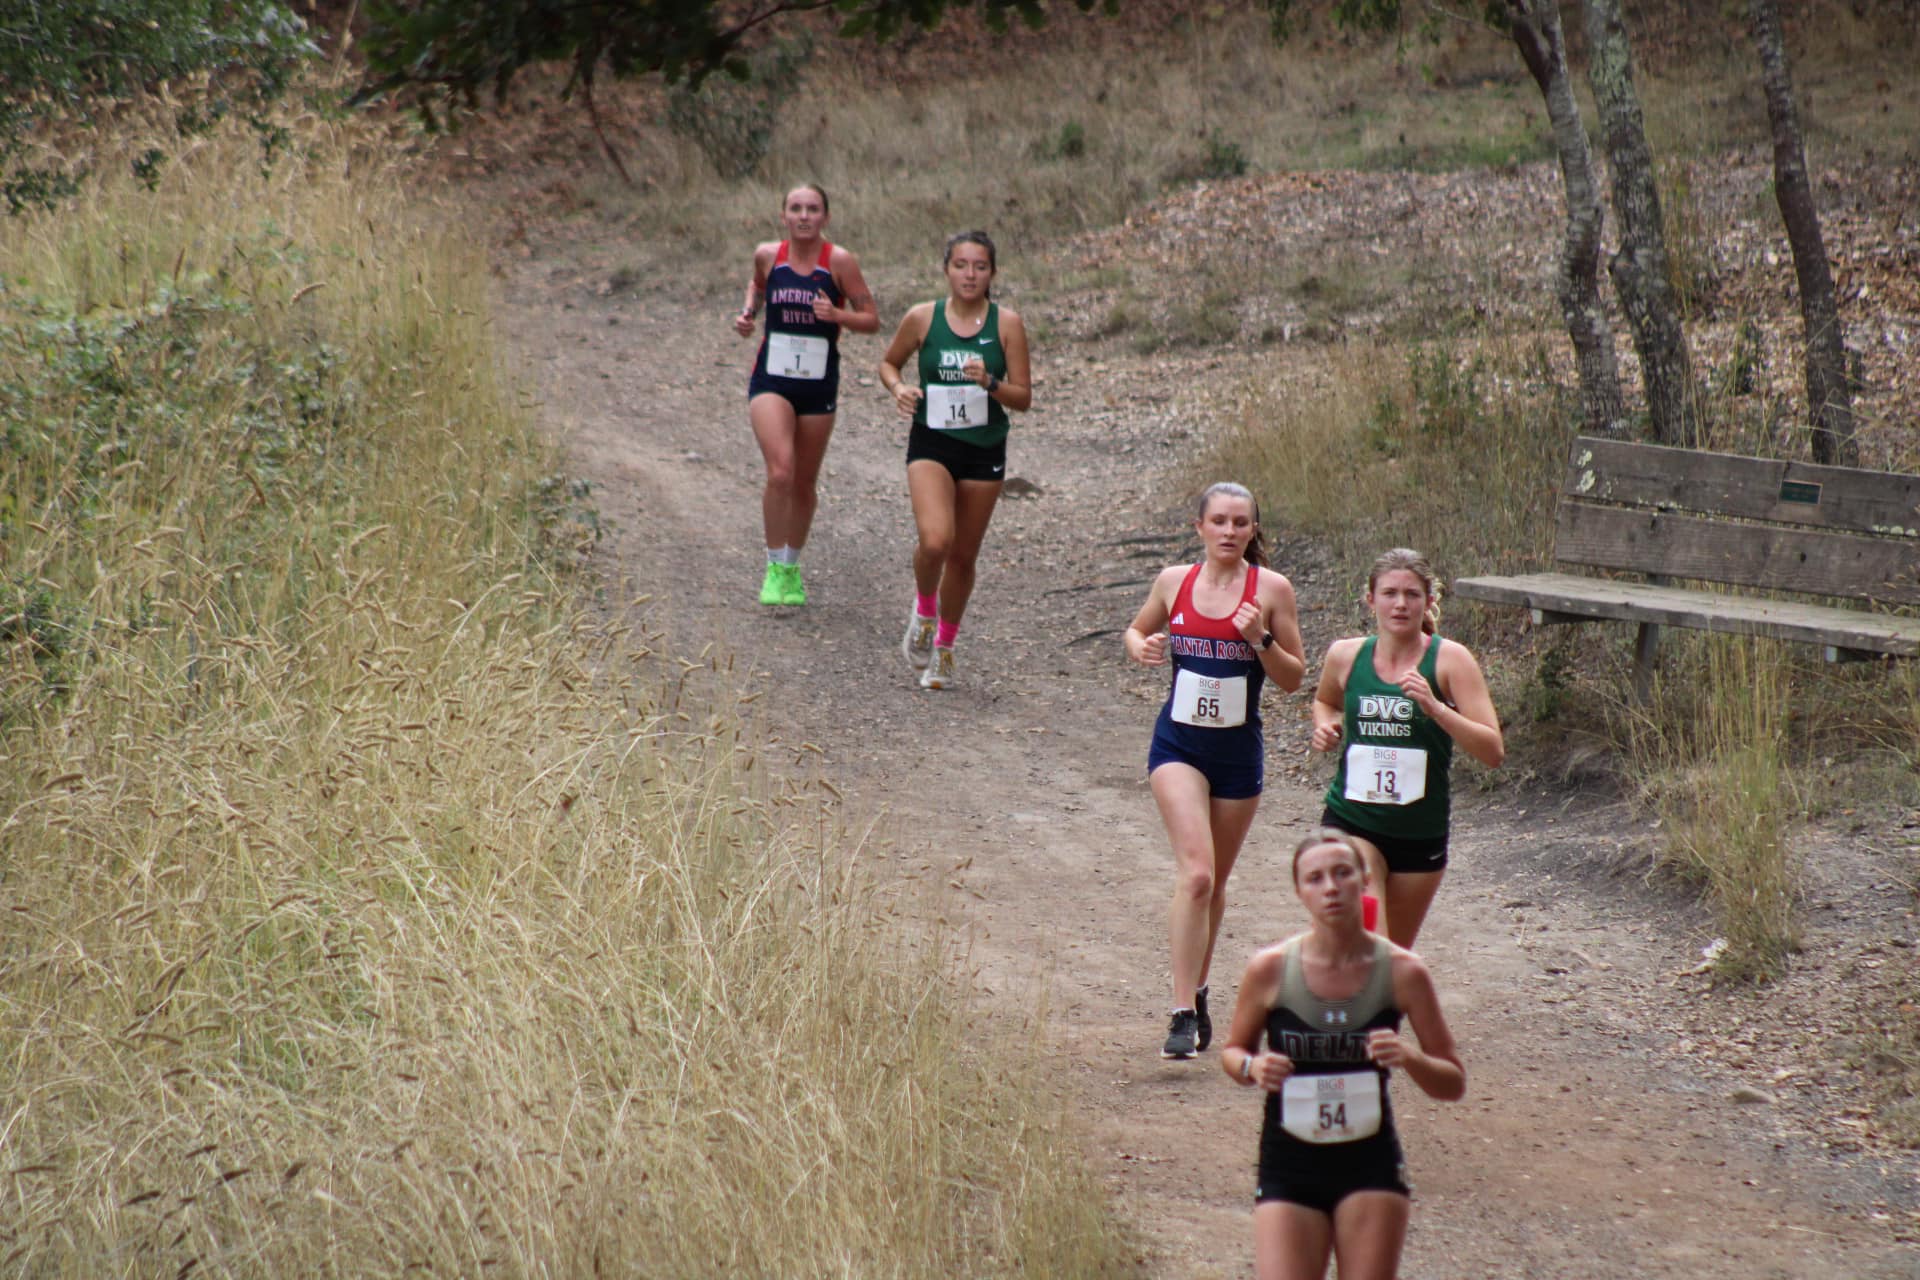 Women's Cross Country team gearing up for CCCAA State Championships this weekend in Fresno